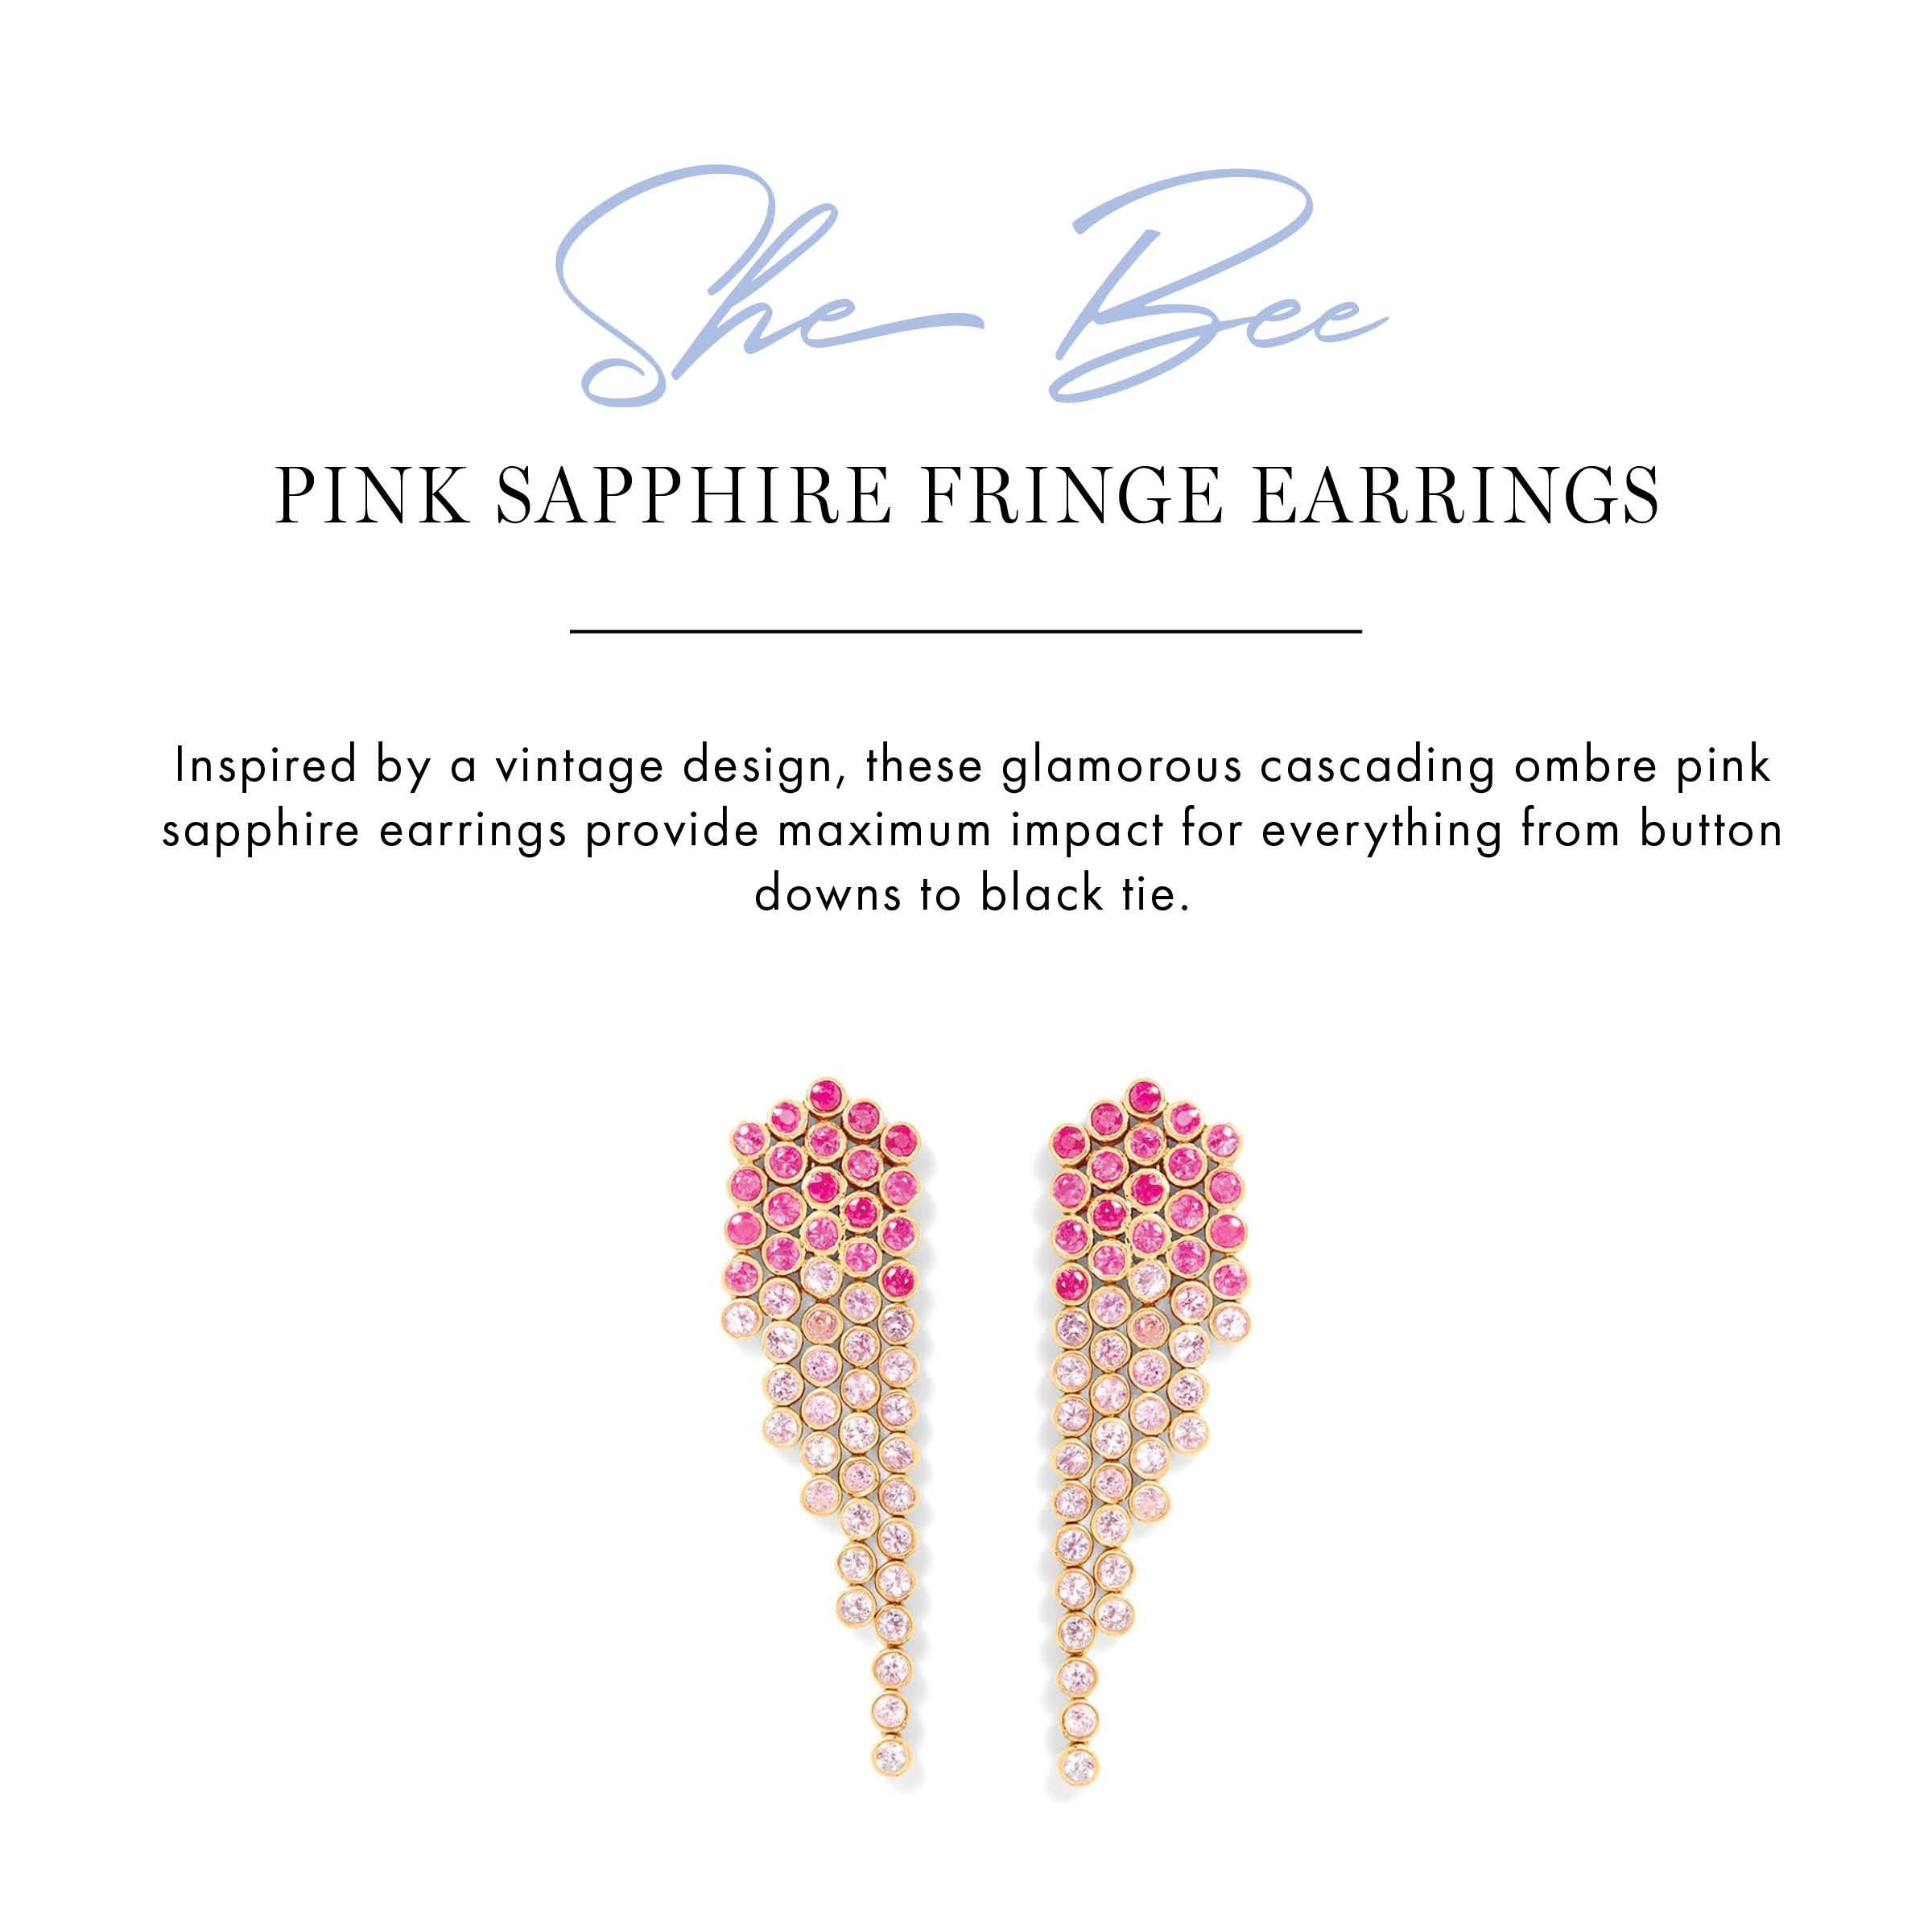 Inspired by a vintage design, these glamorous cascading ombre pink sapphire earrings provide maximum impact for everything from button downs to black tie.

14k Yellow Gold
Pink sapphires
2” long